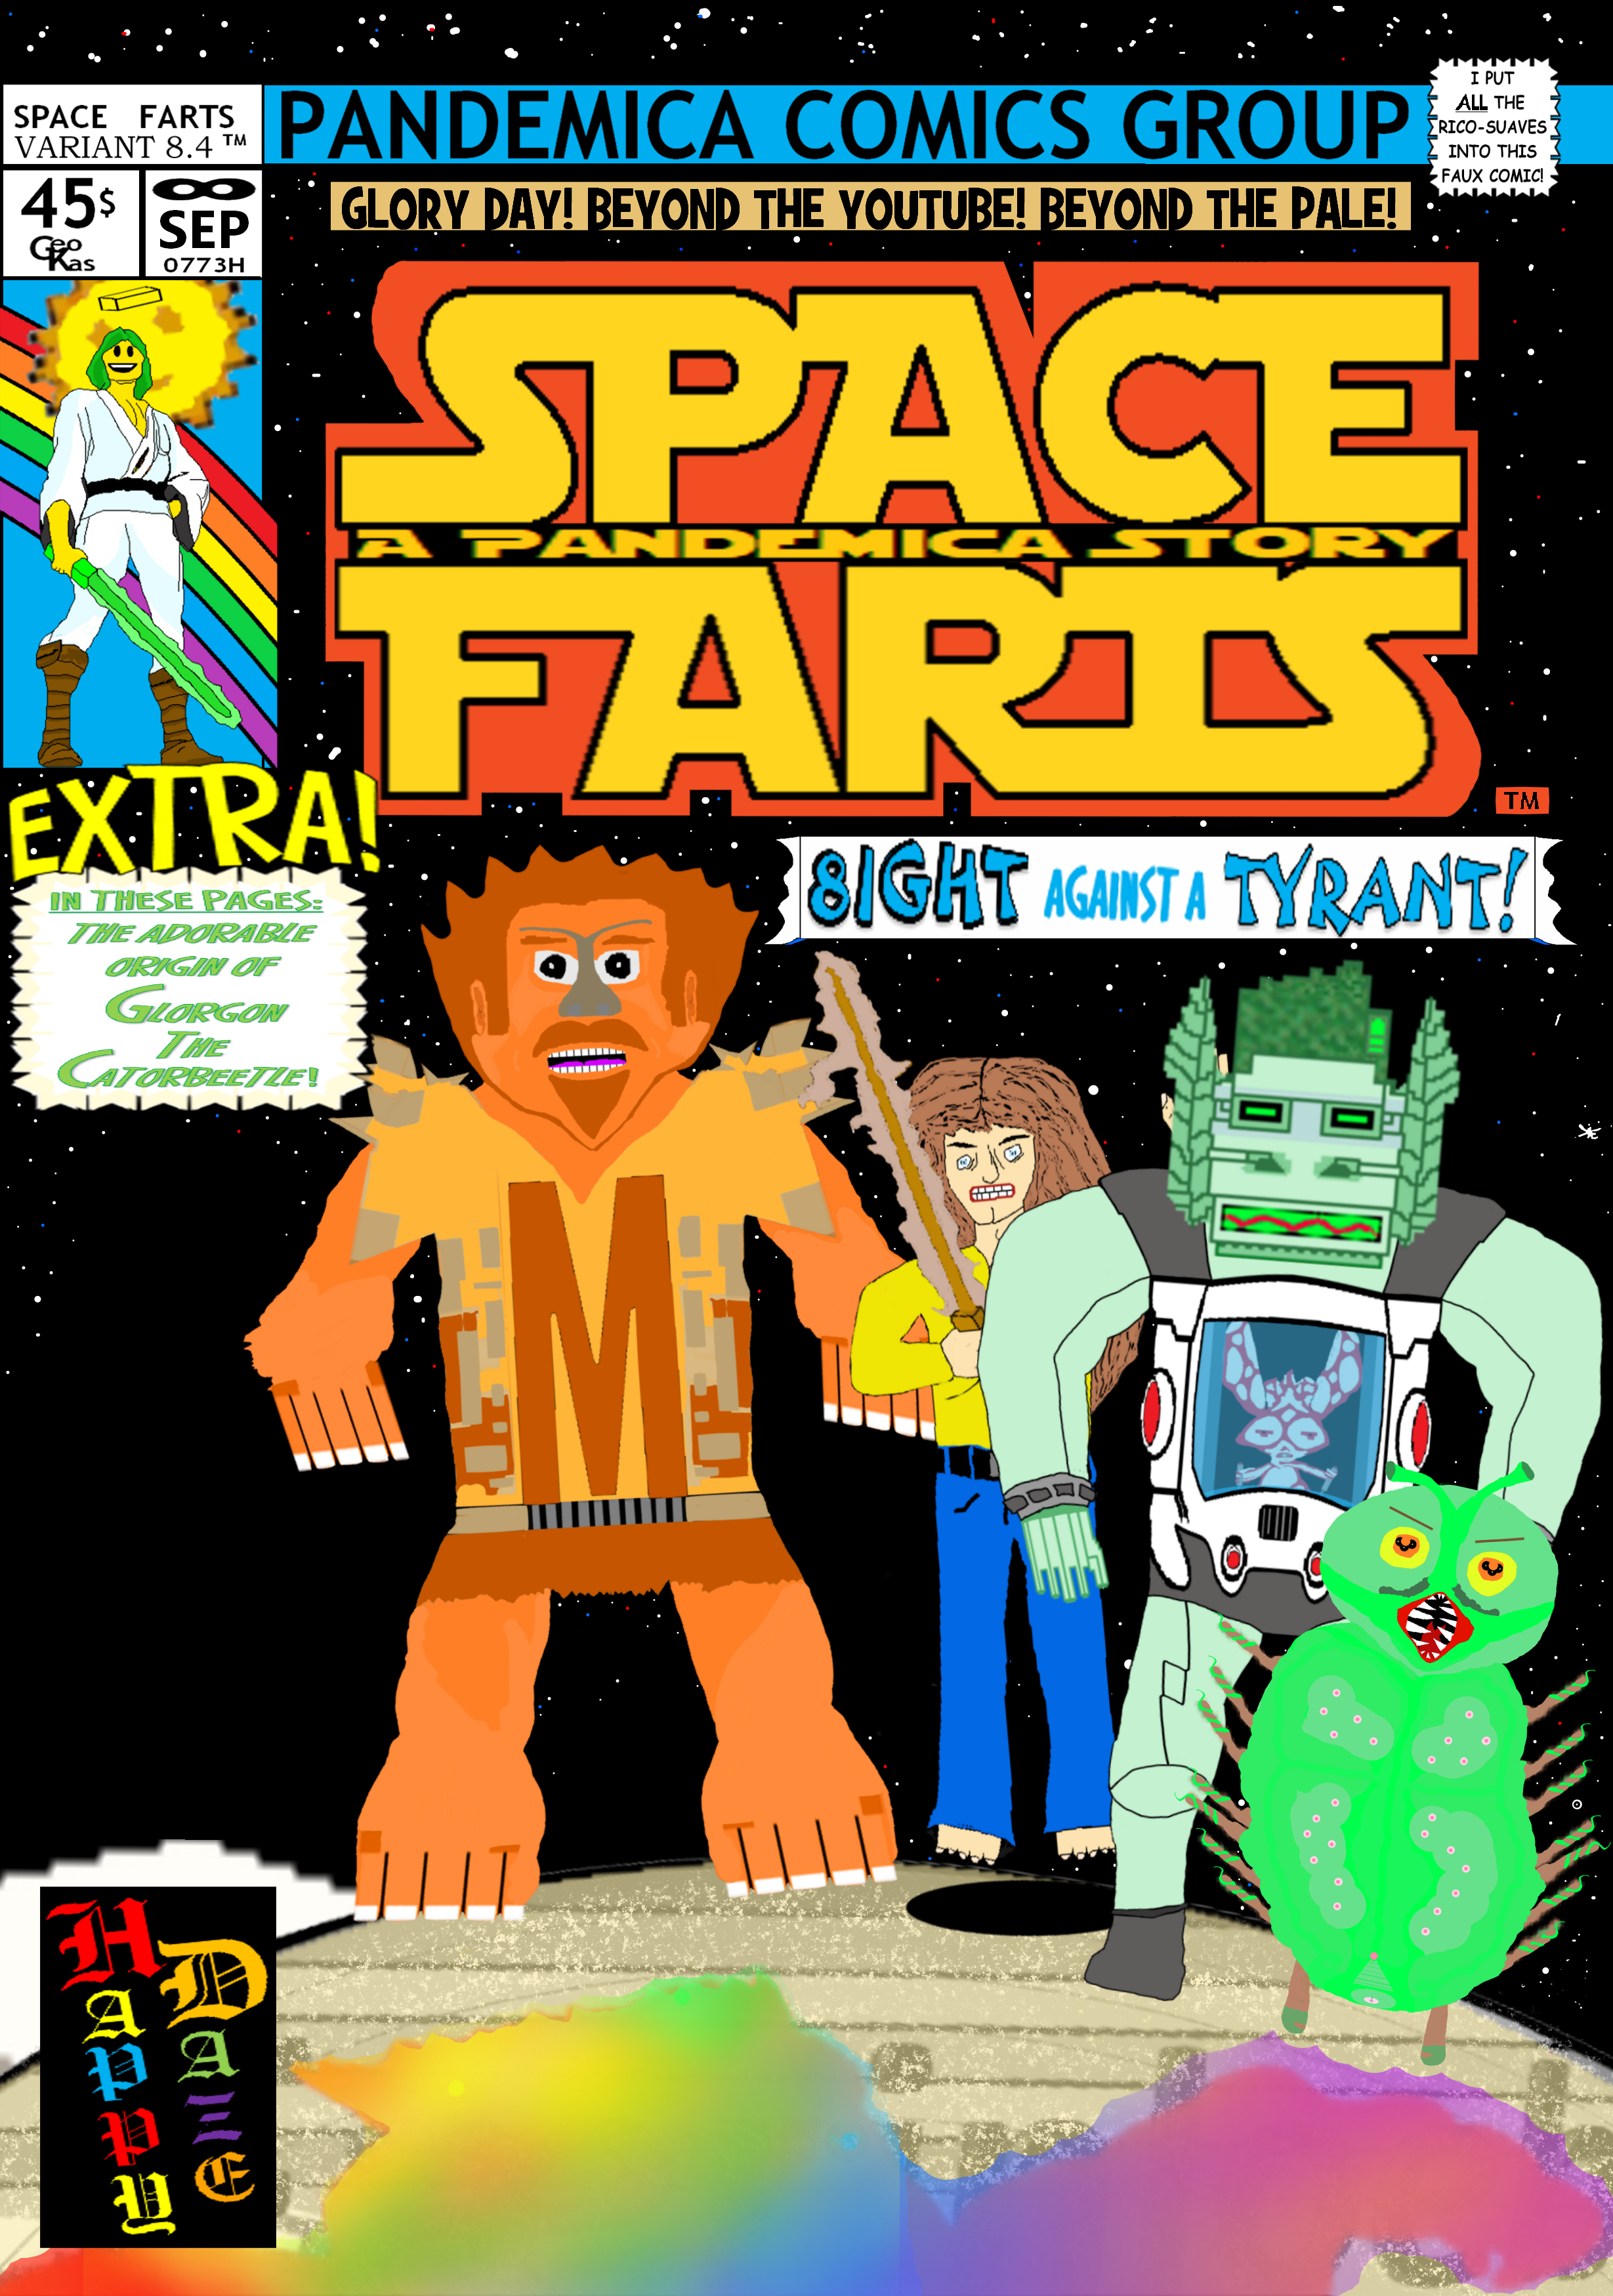 Space Farts #8.4